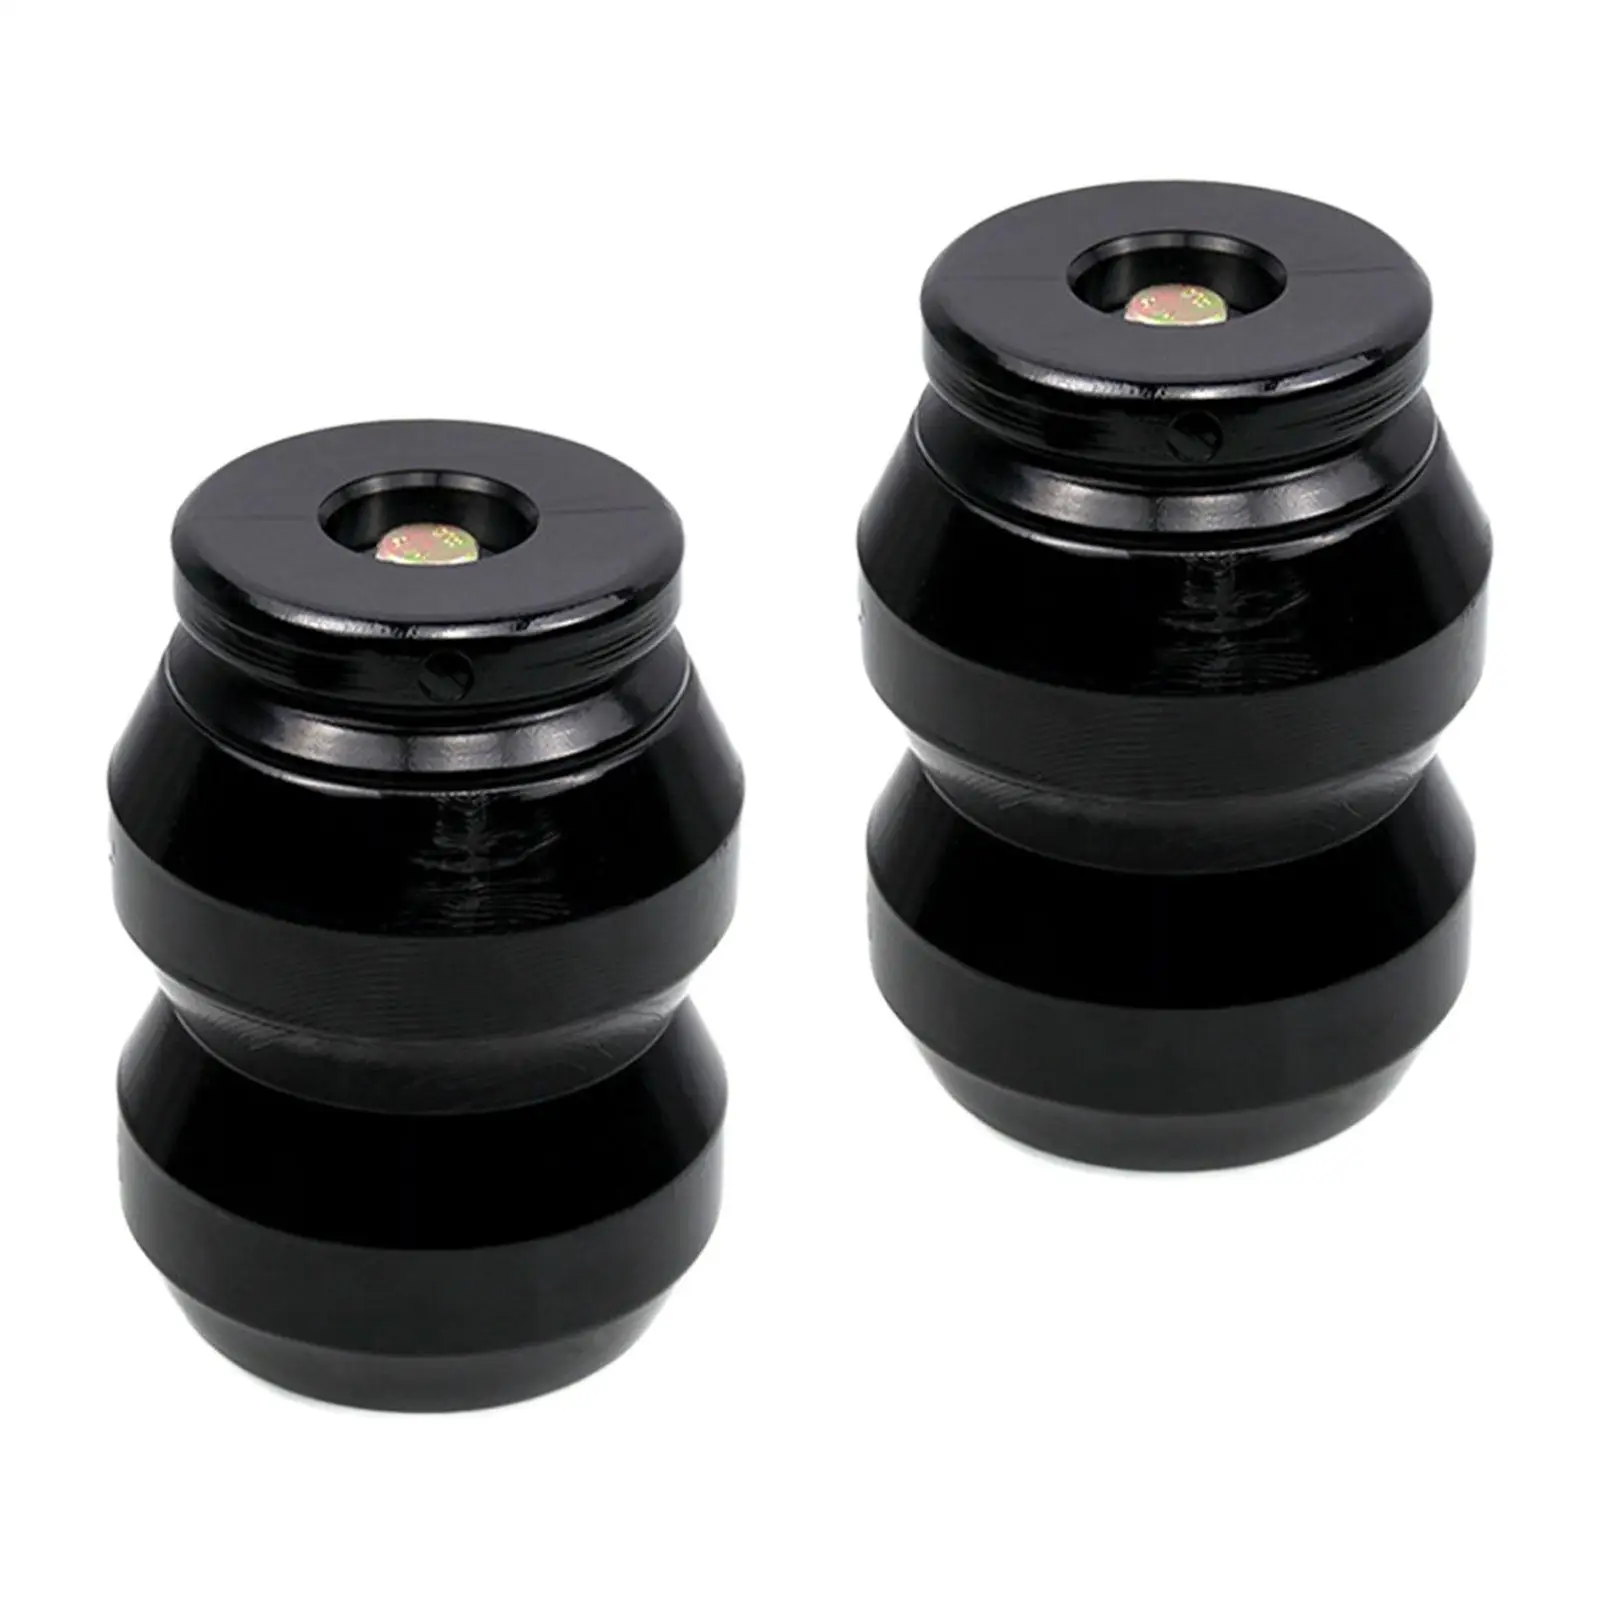 2 Pieces Suspension Enhancement System DR1500dq Rubber High Quality Directly Replace for Dodge RAM 1500 2WD 4WD Accessory